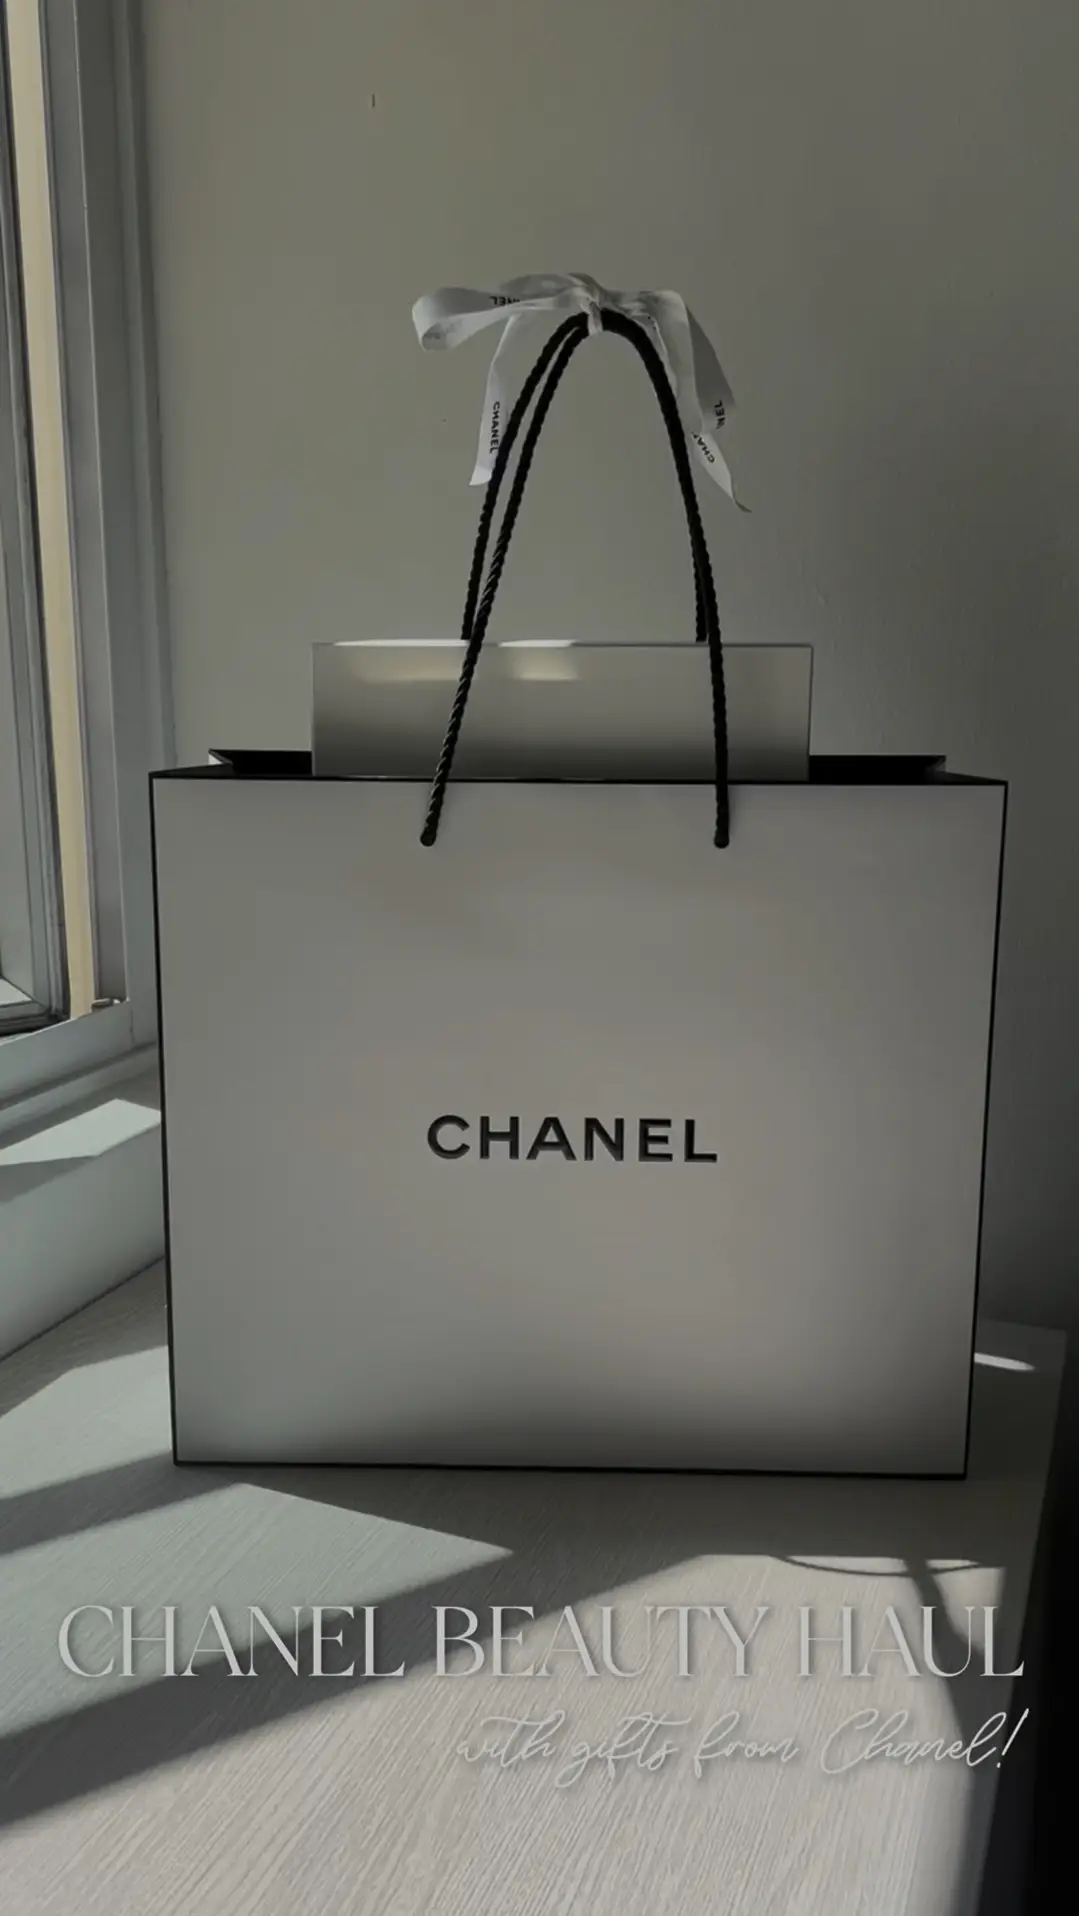 CHANEL BEAUTY HAUL + GIFTS FROM CHANEL! ✨, Video published by Cassandra Ng